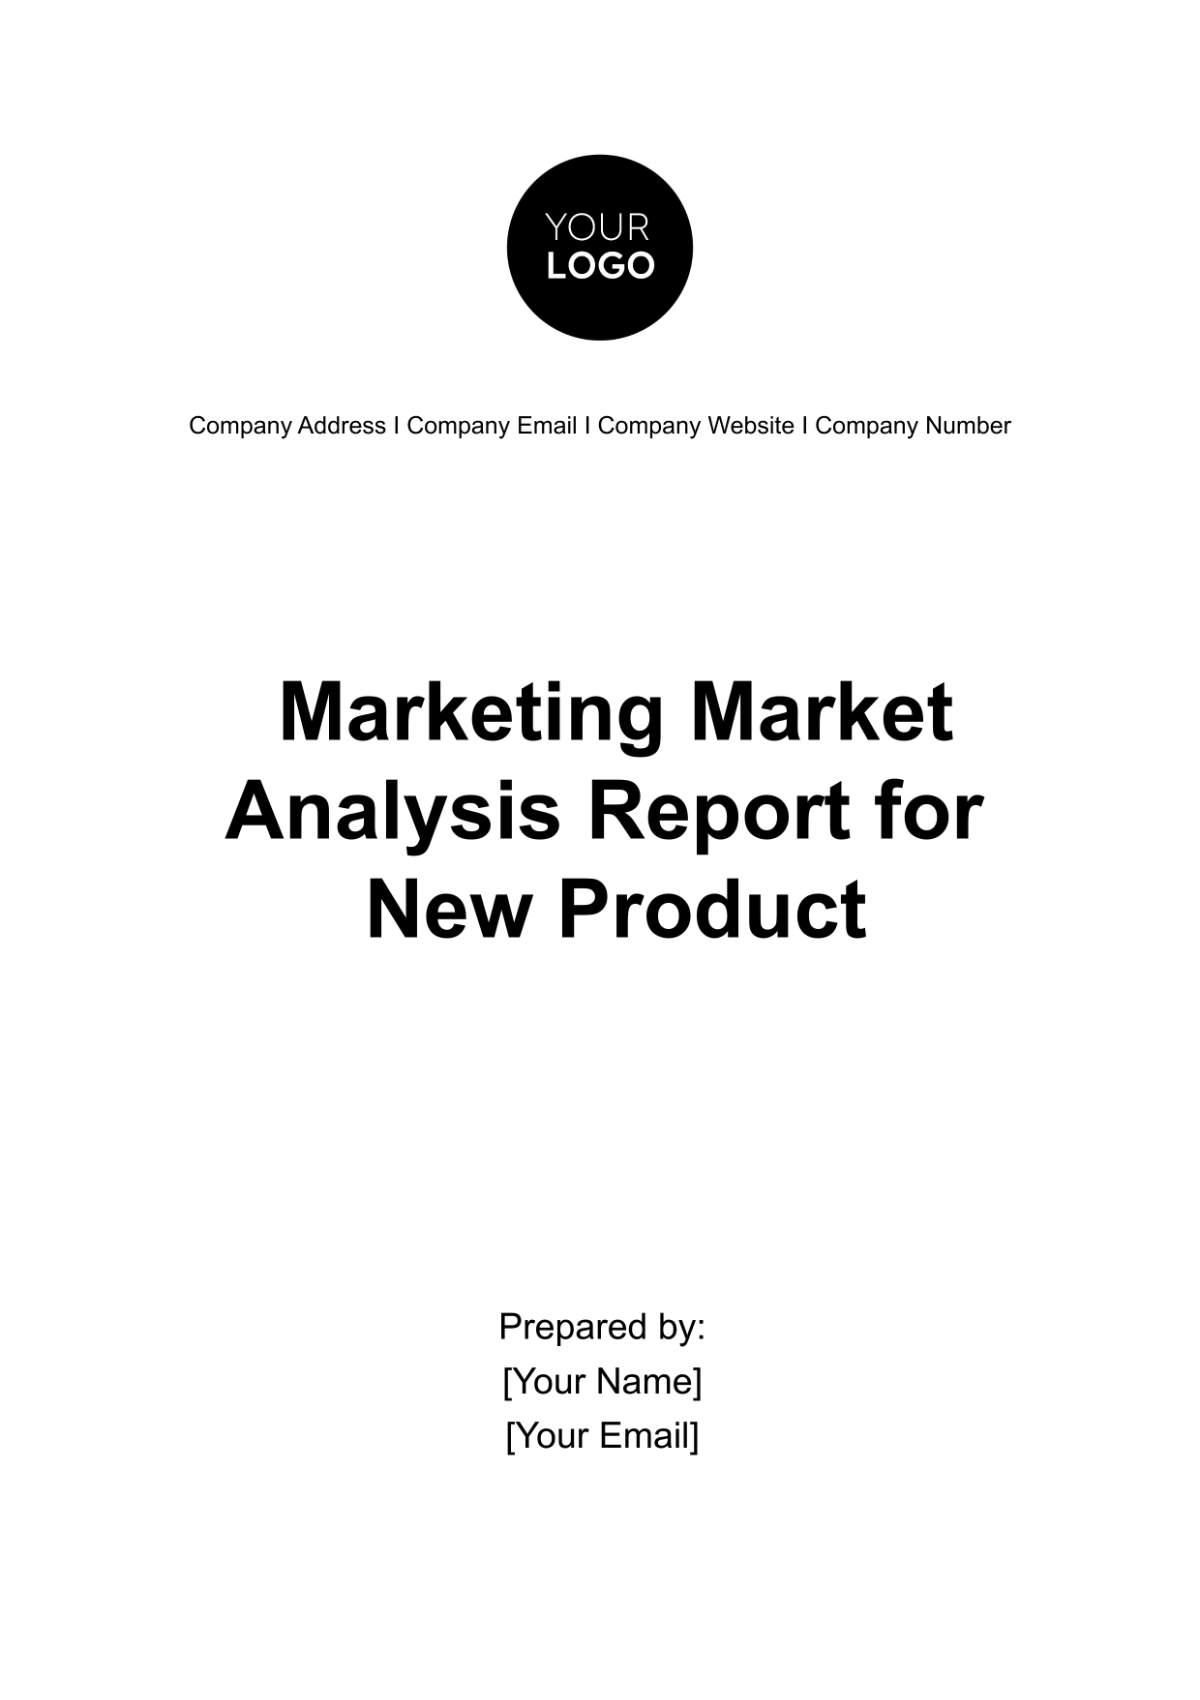 Marketing Market Analysis Report for New Product Template